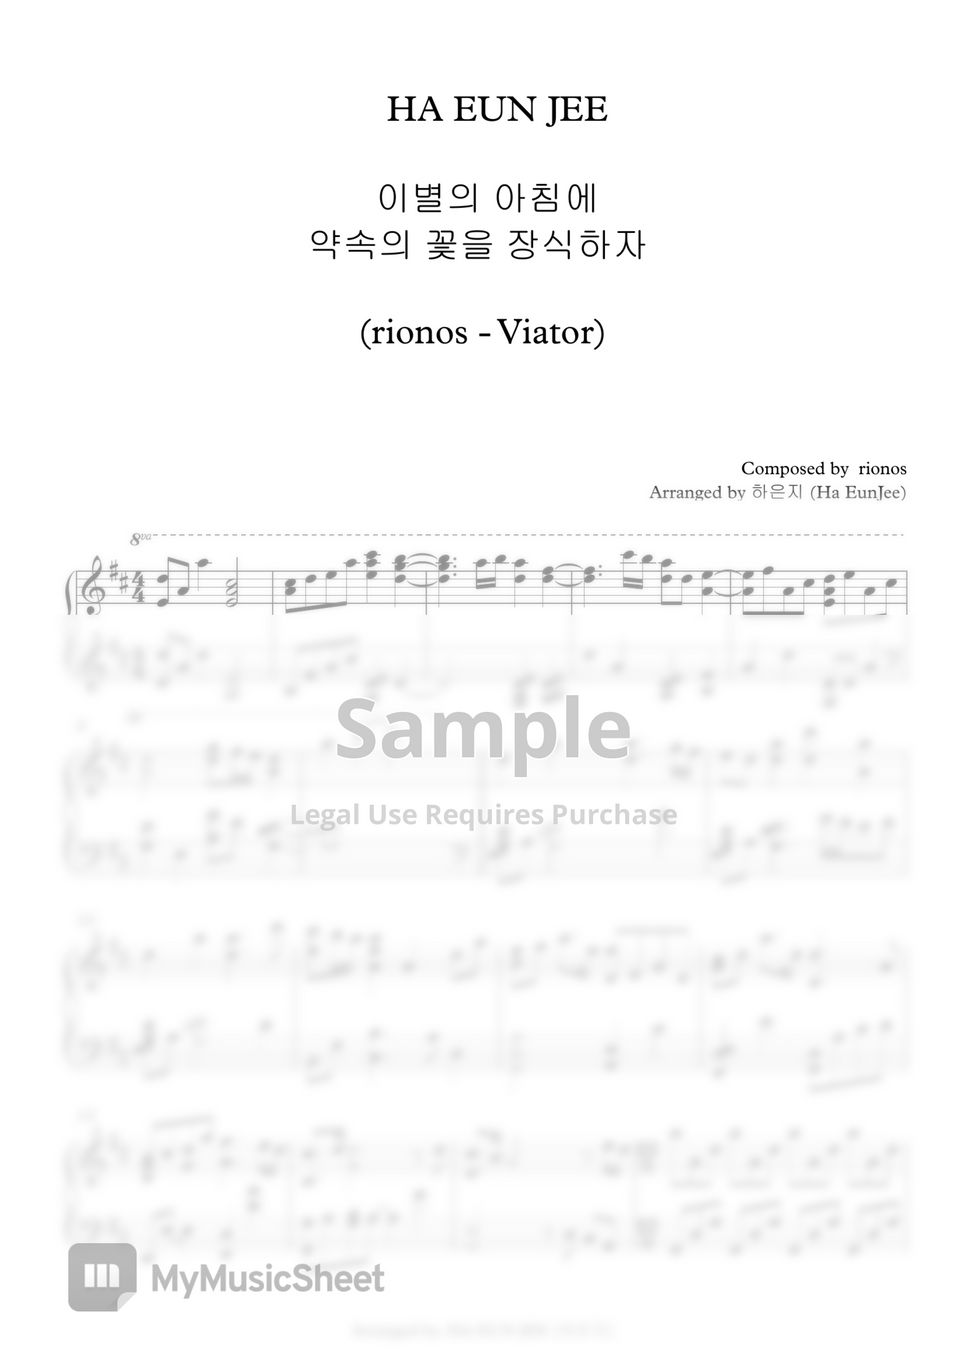 [When The Promised Flower Blooms OST] - Viator (Rionos) by Ha EunJee